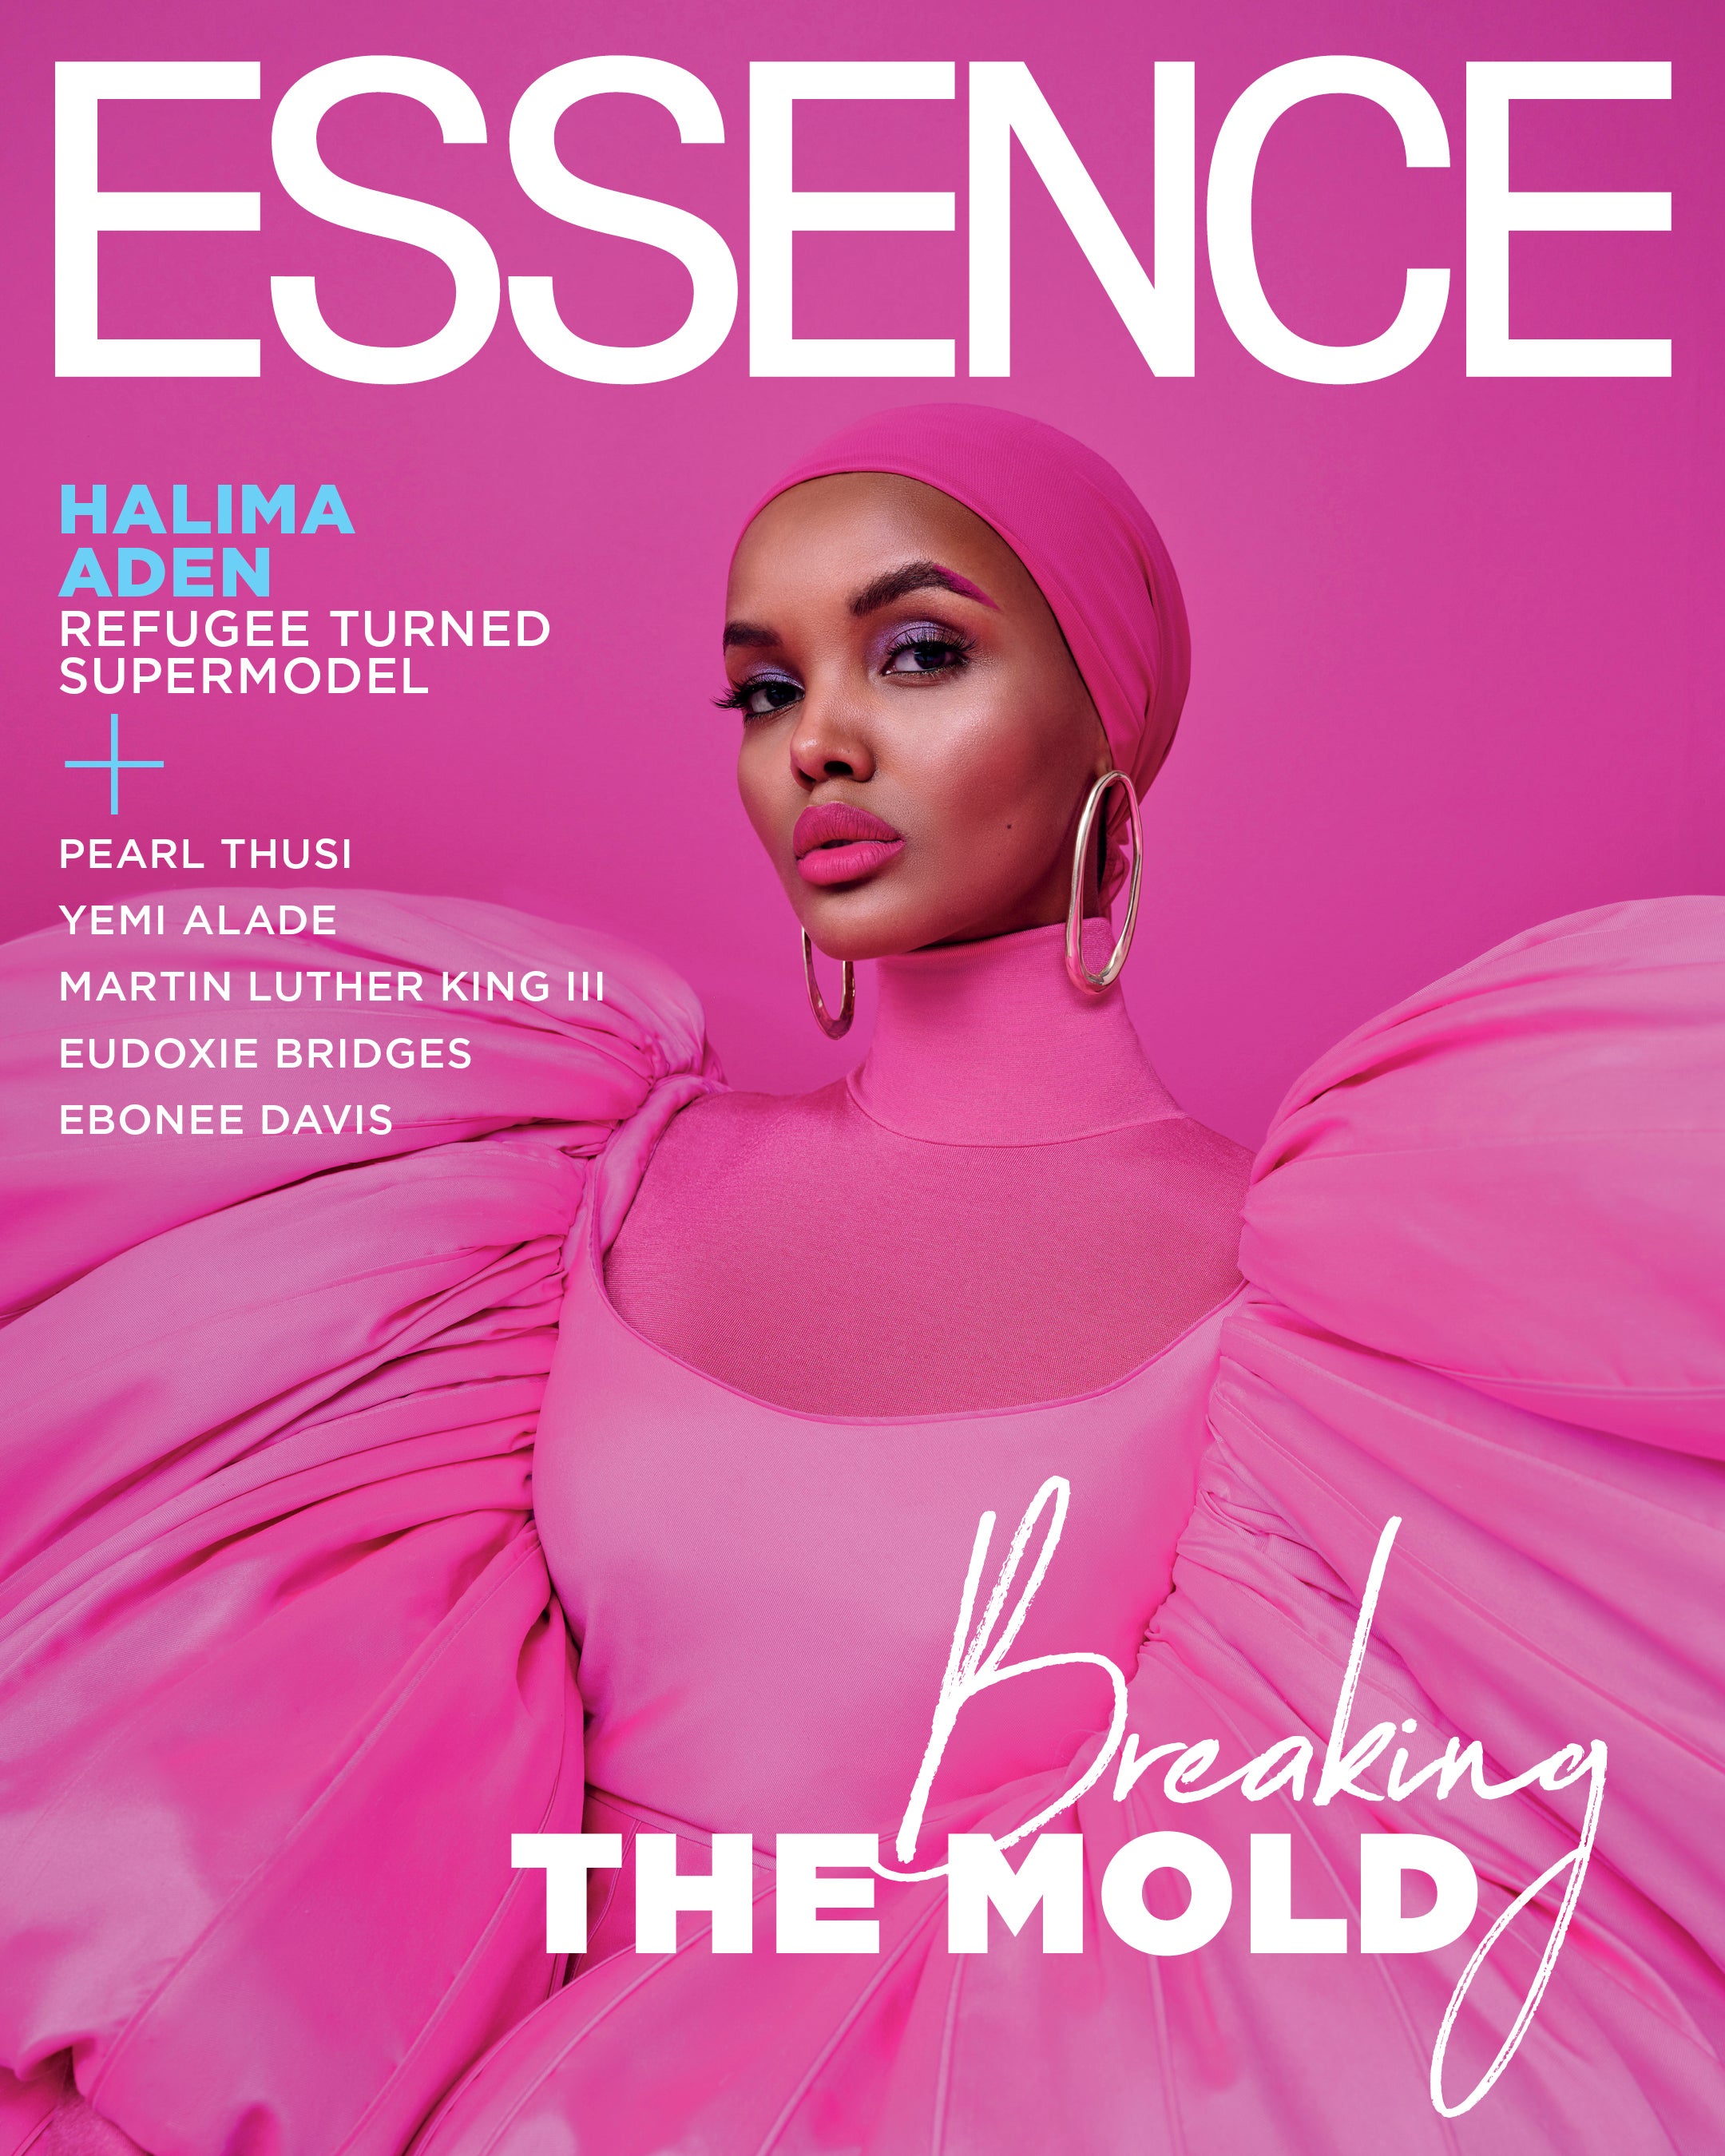 First Look: Model Halima Aden Celebrates Disrupting Traditional Beauty Standards On January/February 2020 Cover Of ESSENCE Magazine